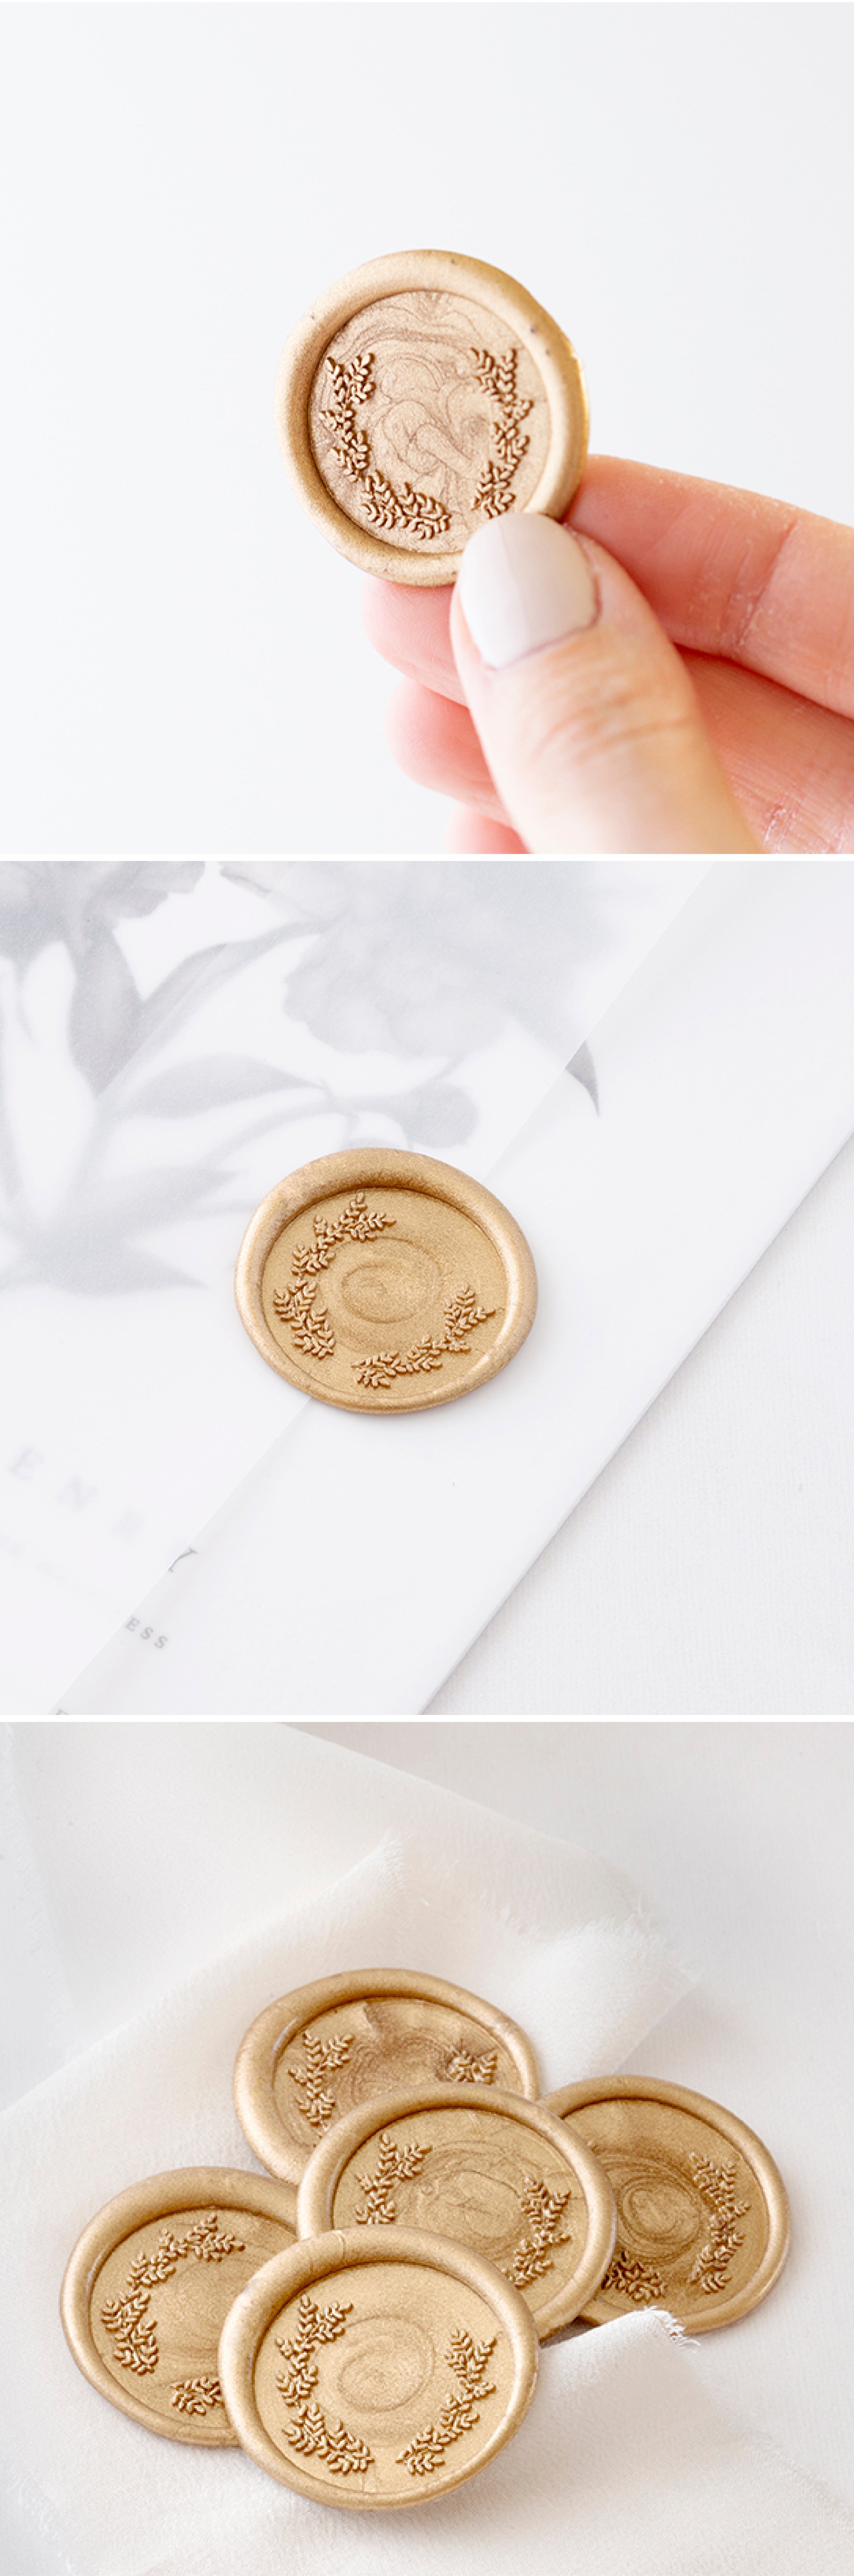 Wax Seal Stamps, White Wax Seal, Initials Wax Seal Stamp Wedding Invitation  Wax Seal, White Wax Seal Stickers, Initials Wax Seal Stamp 